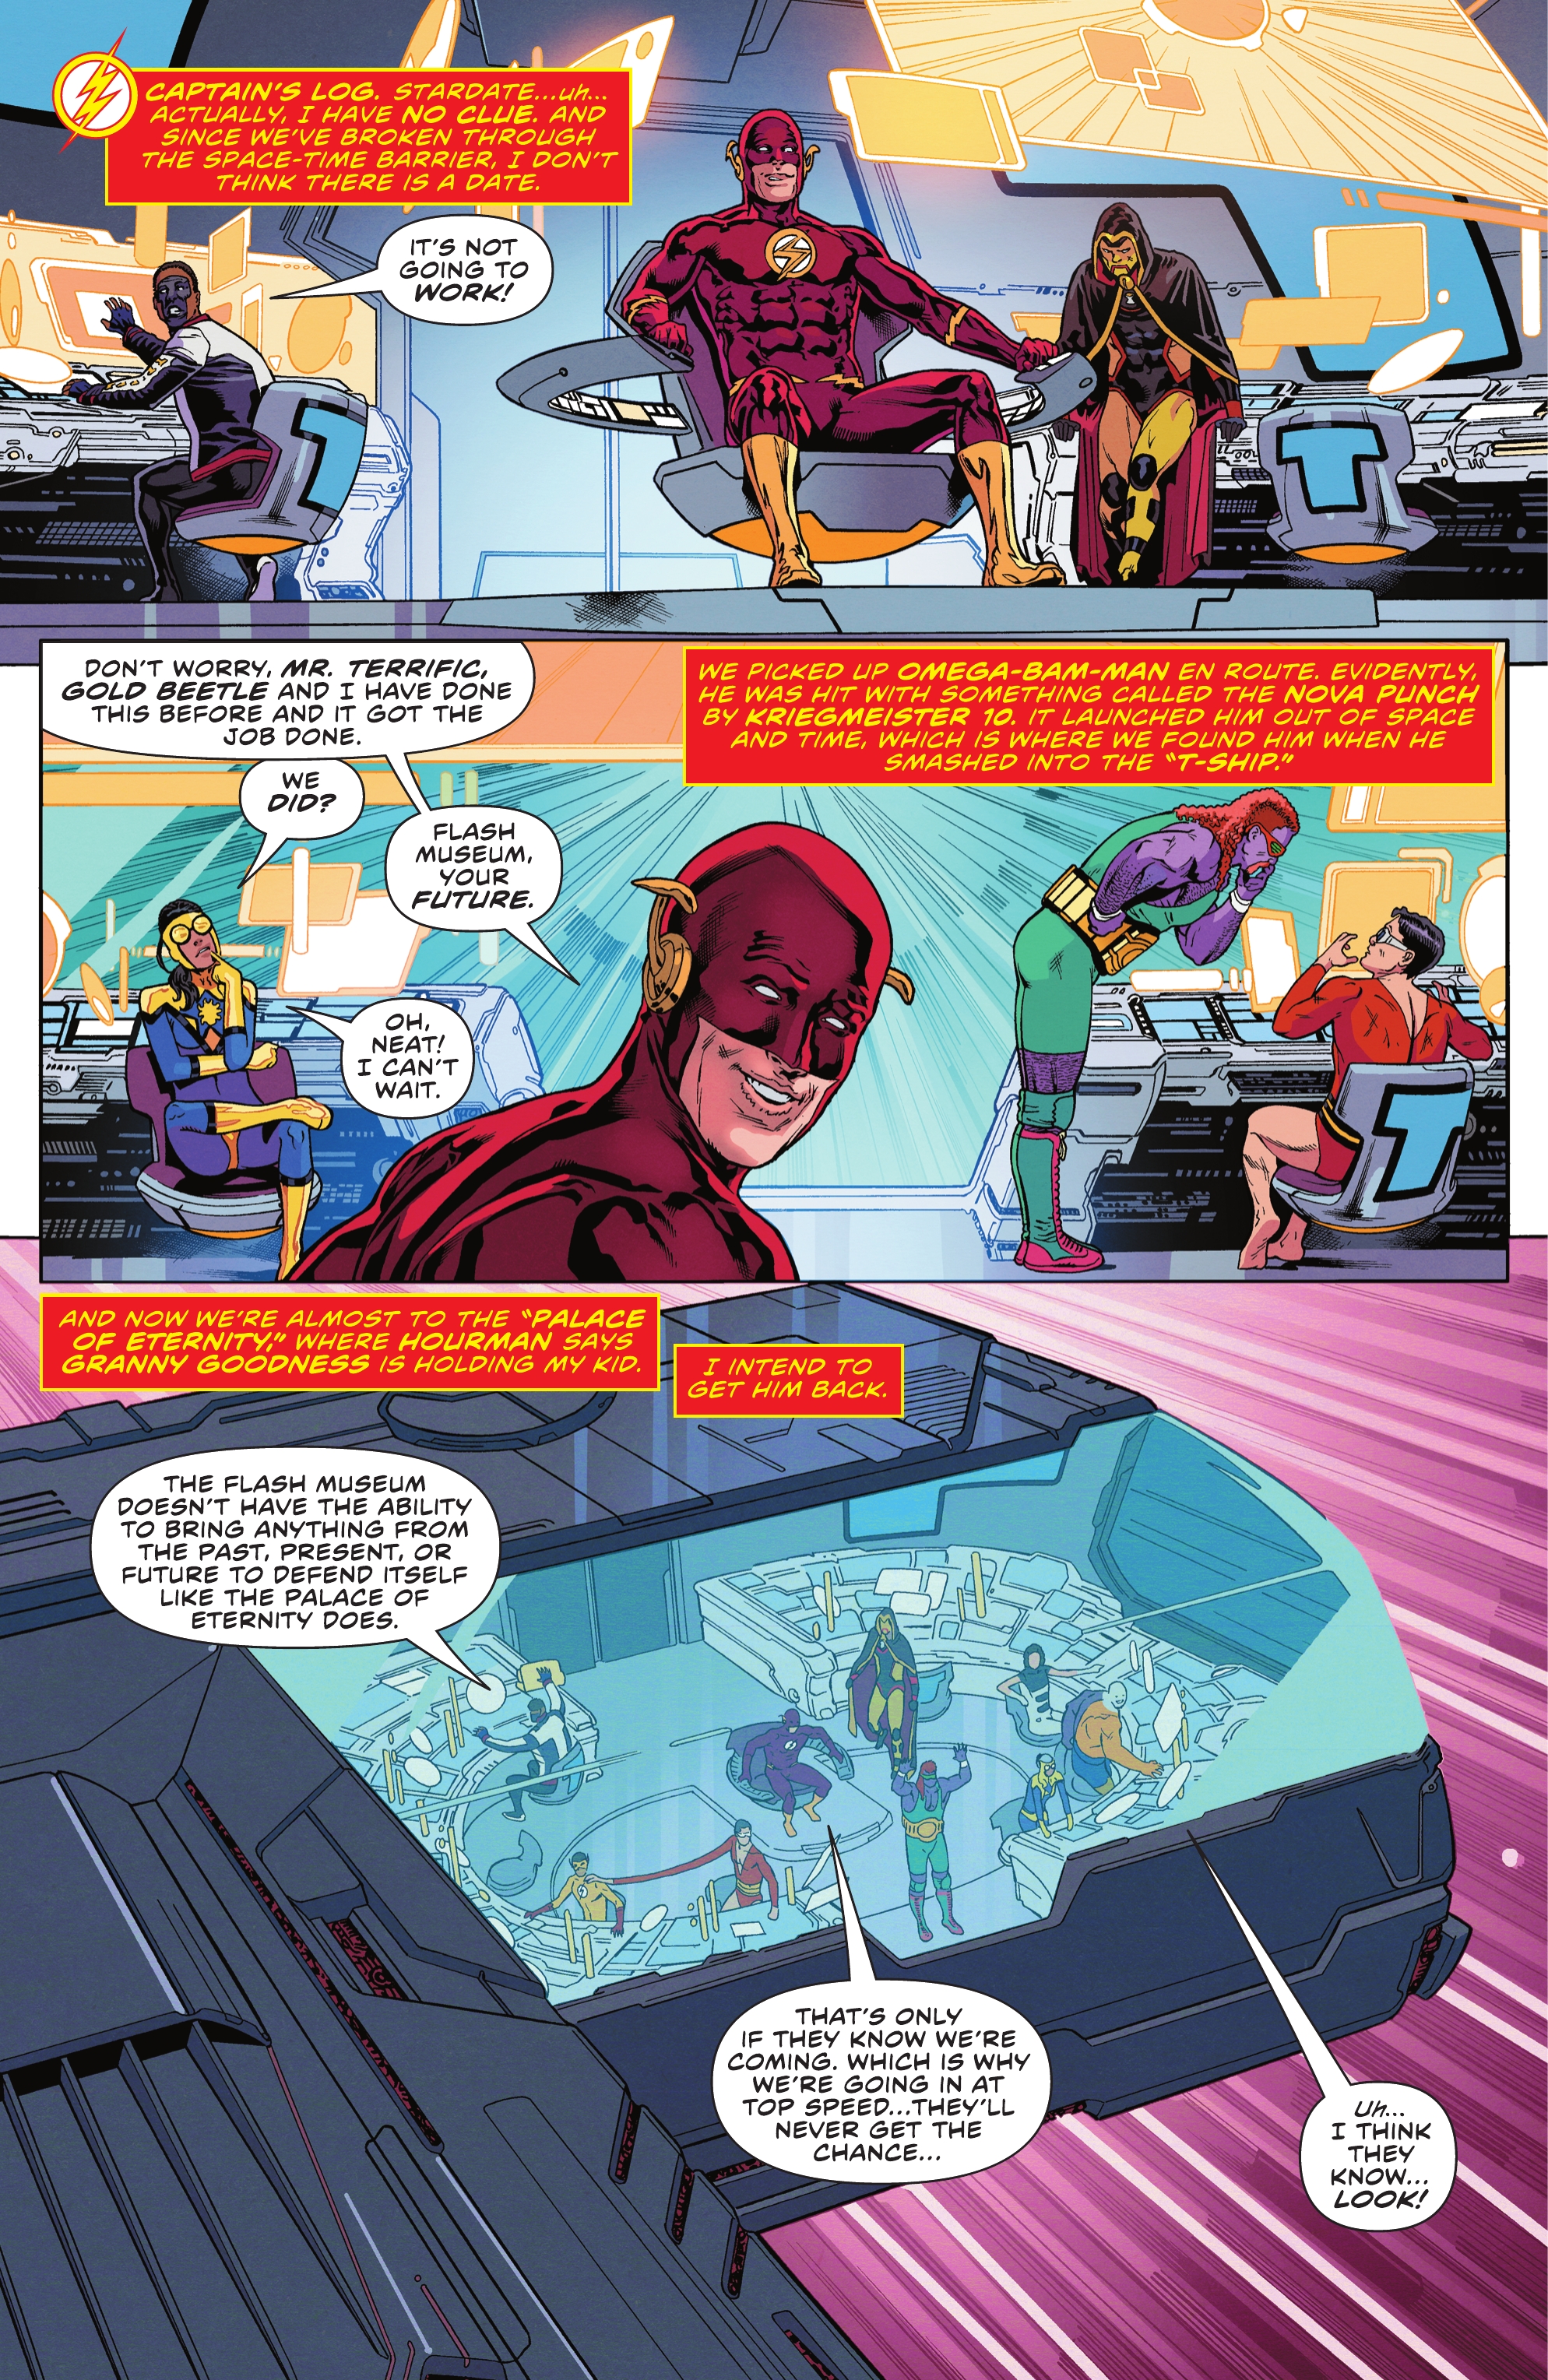 The Flash (2016-): Chapter 799 - Page 3